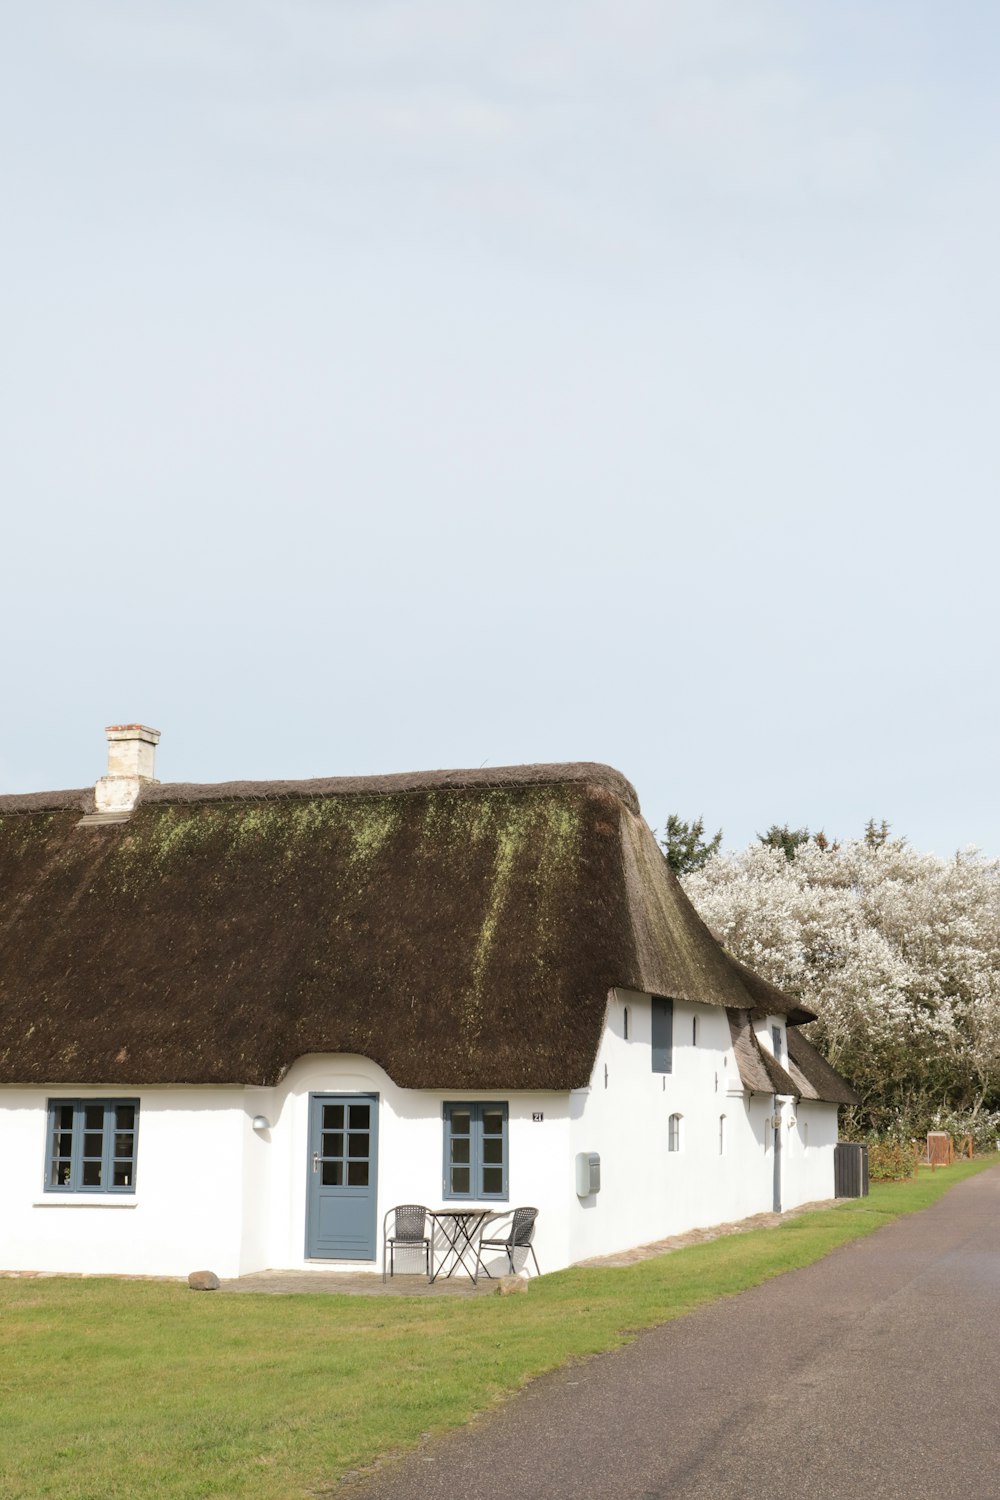 a white house with a thatched roof